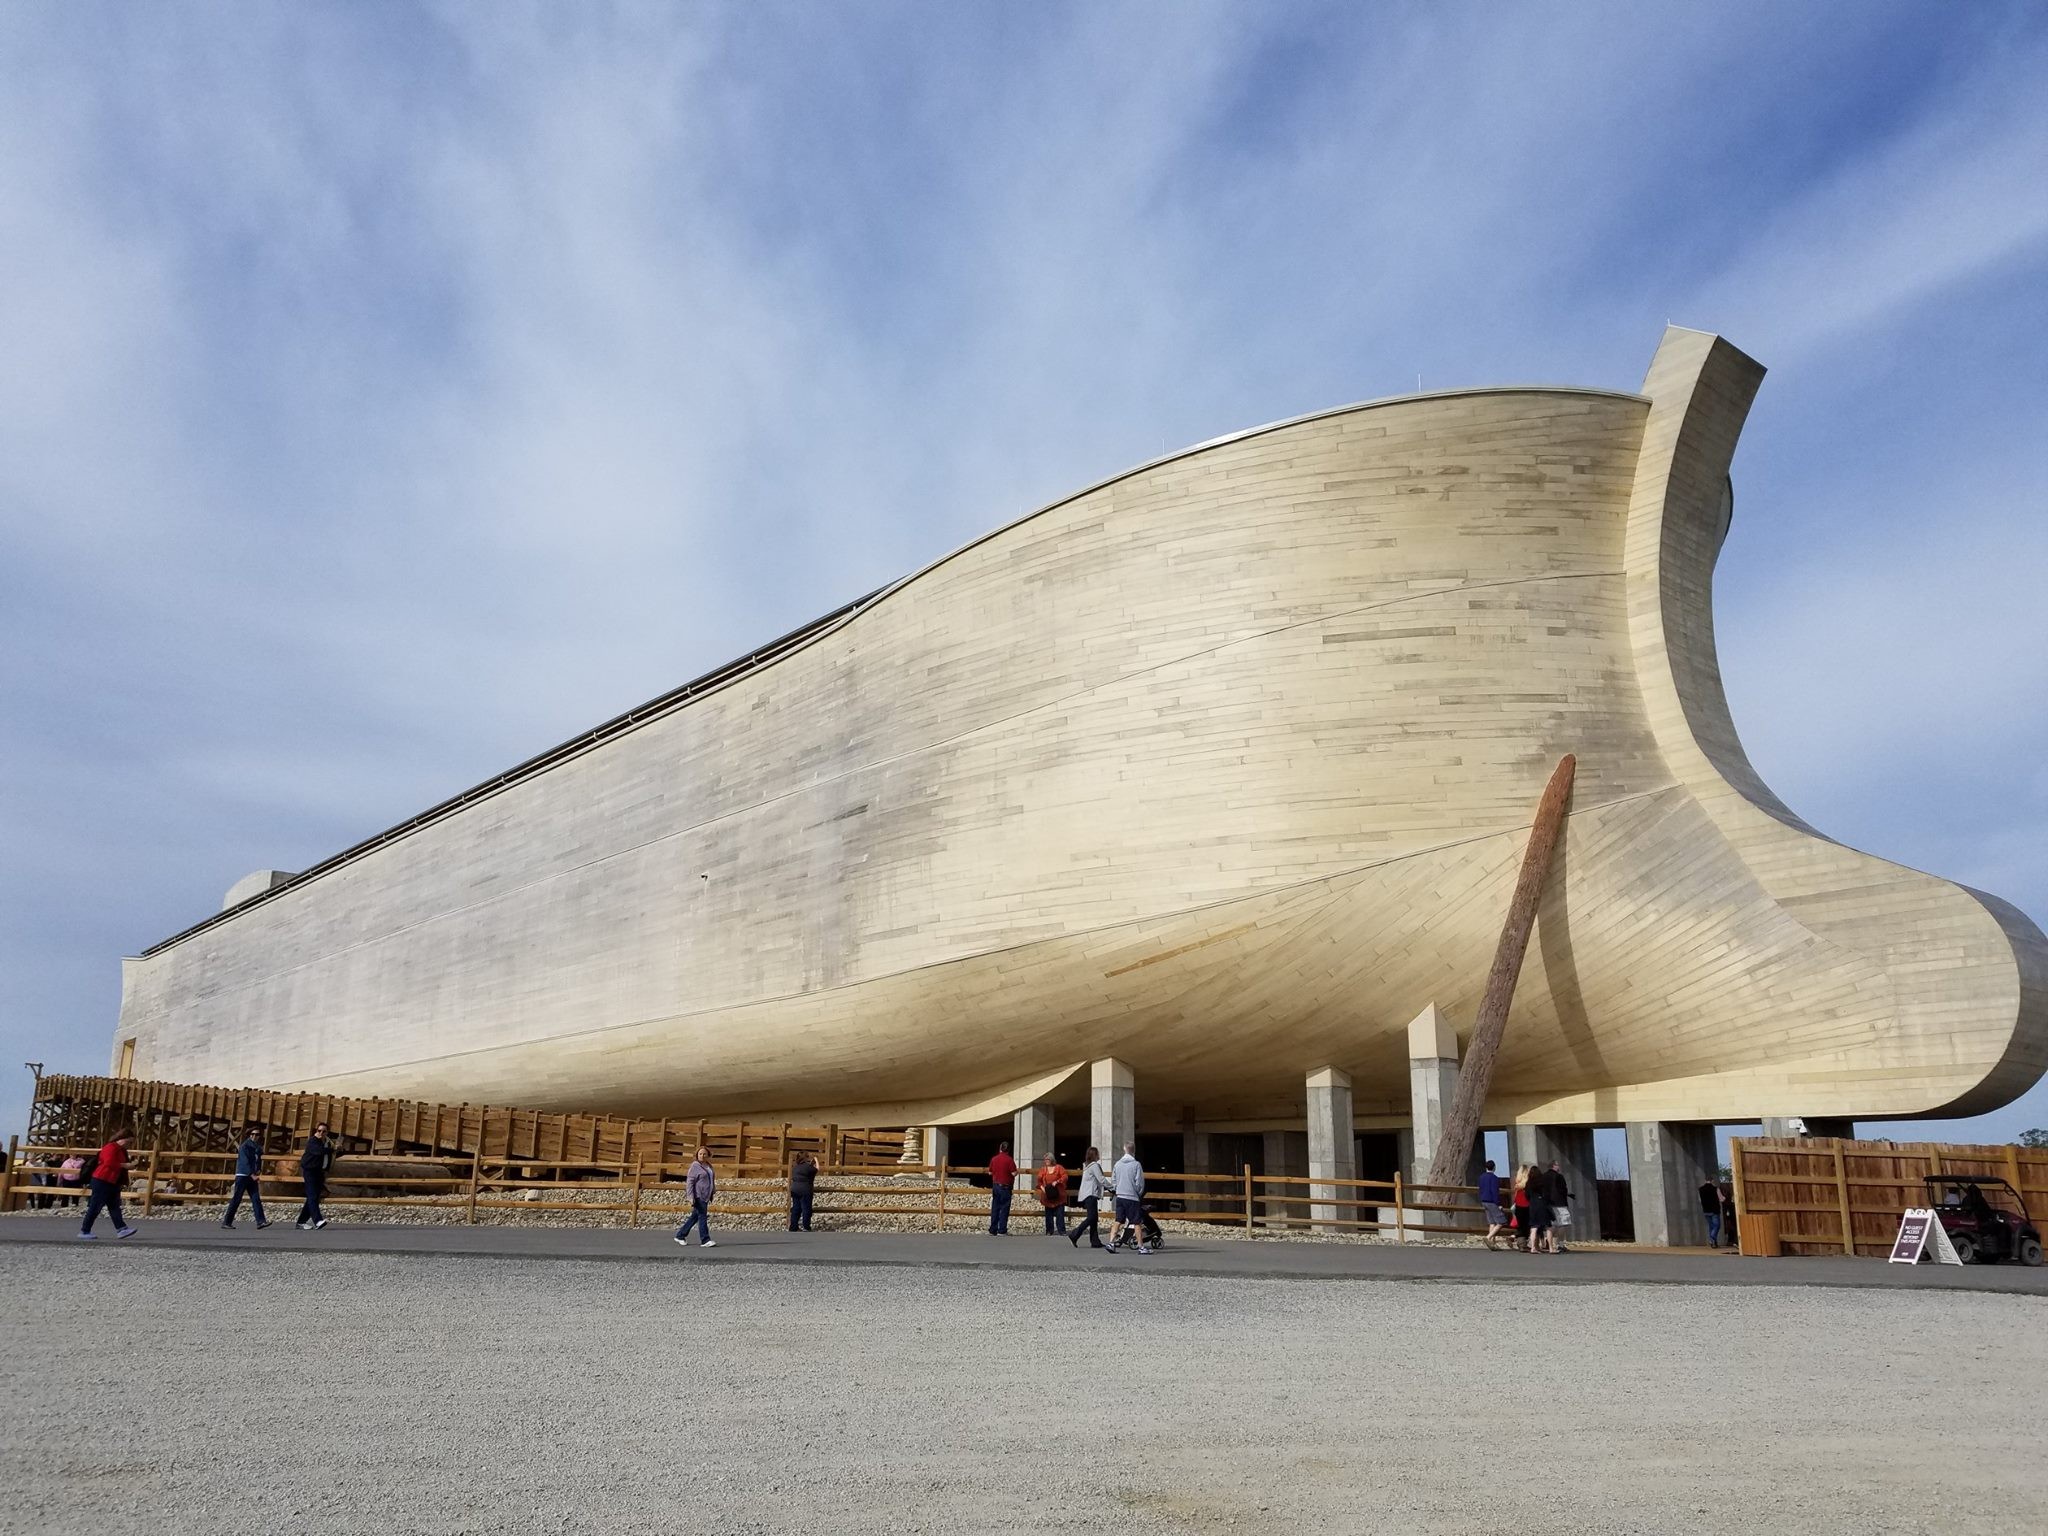 Watch Out Orlando The Ark Encounter In Kentucky Has A Diner And A Petting Zoo Blogs